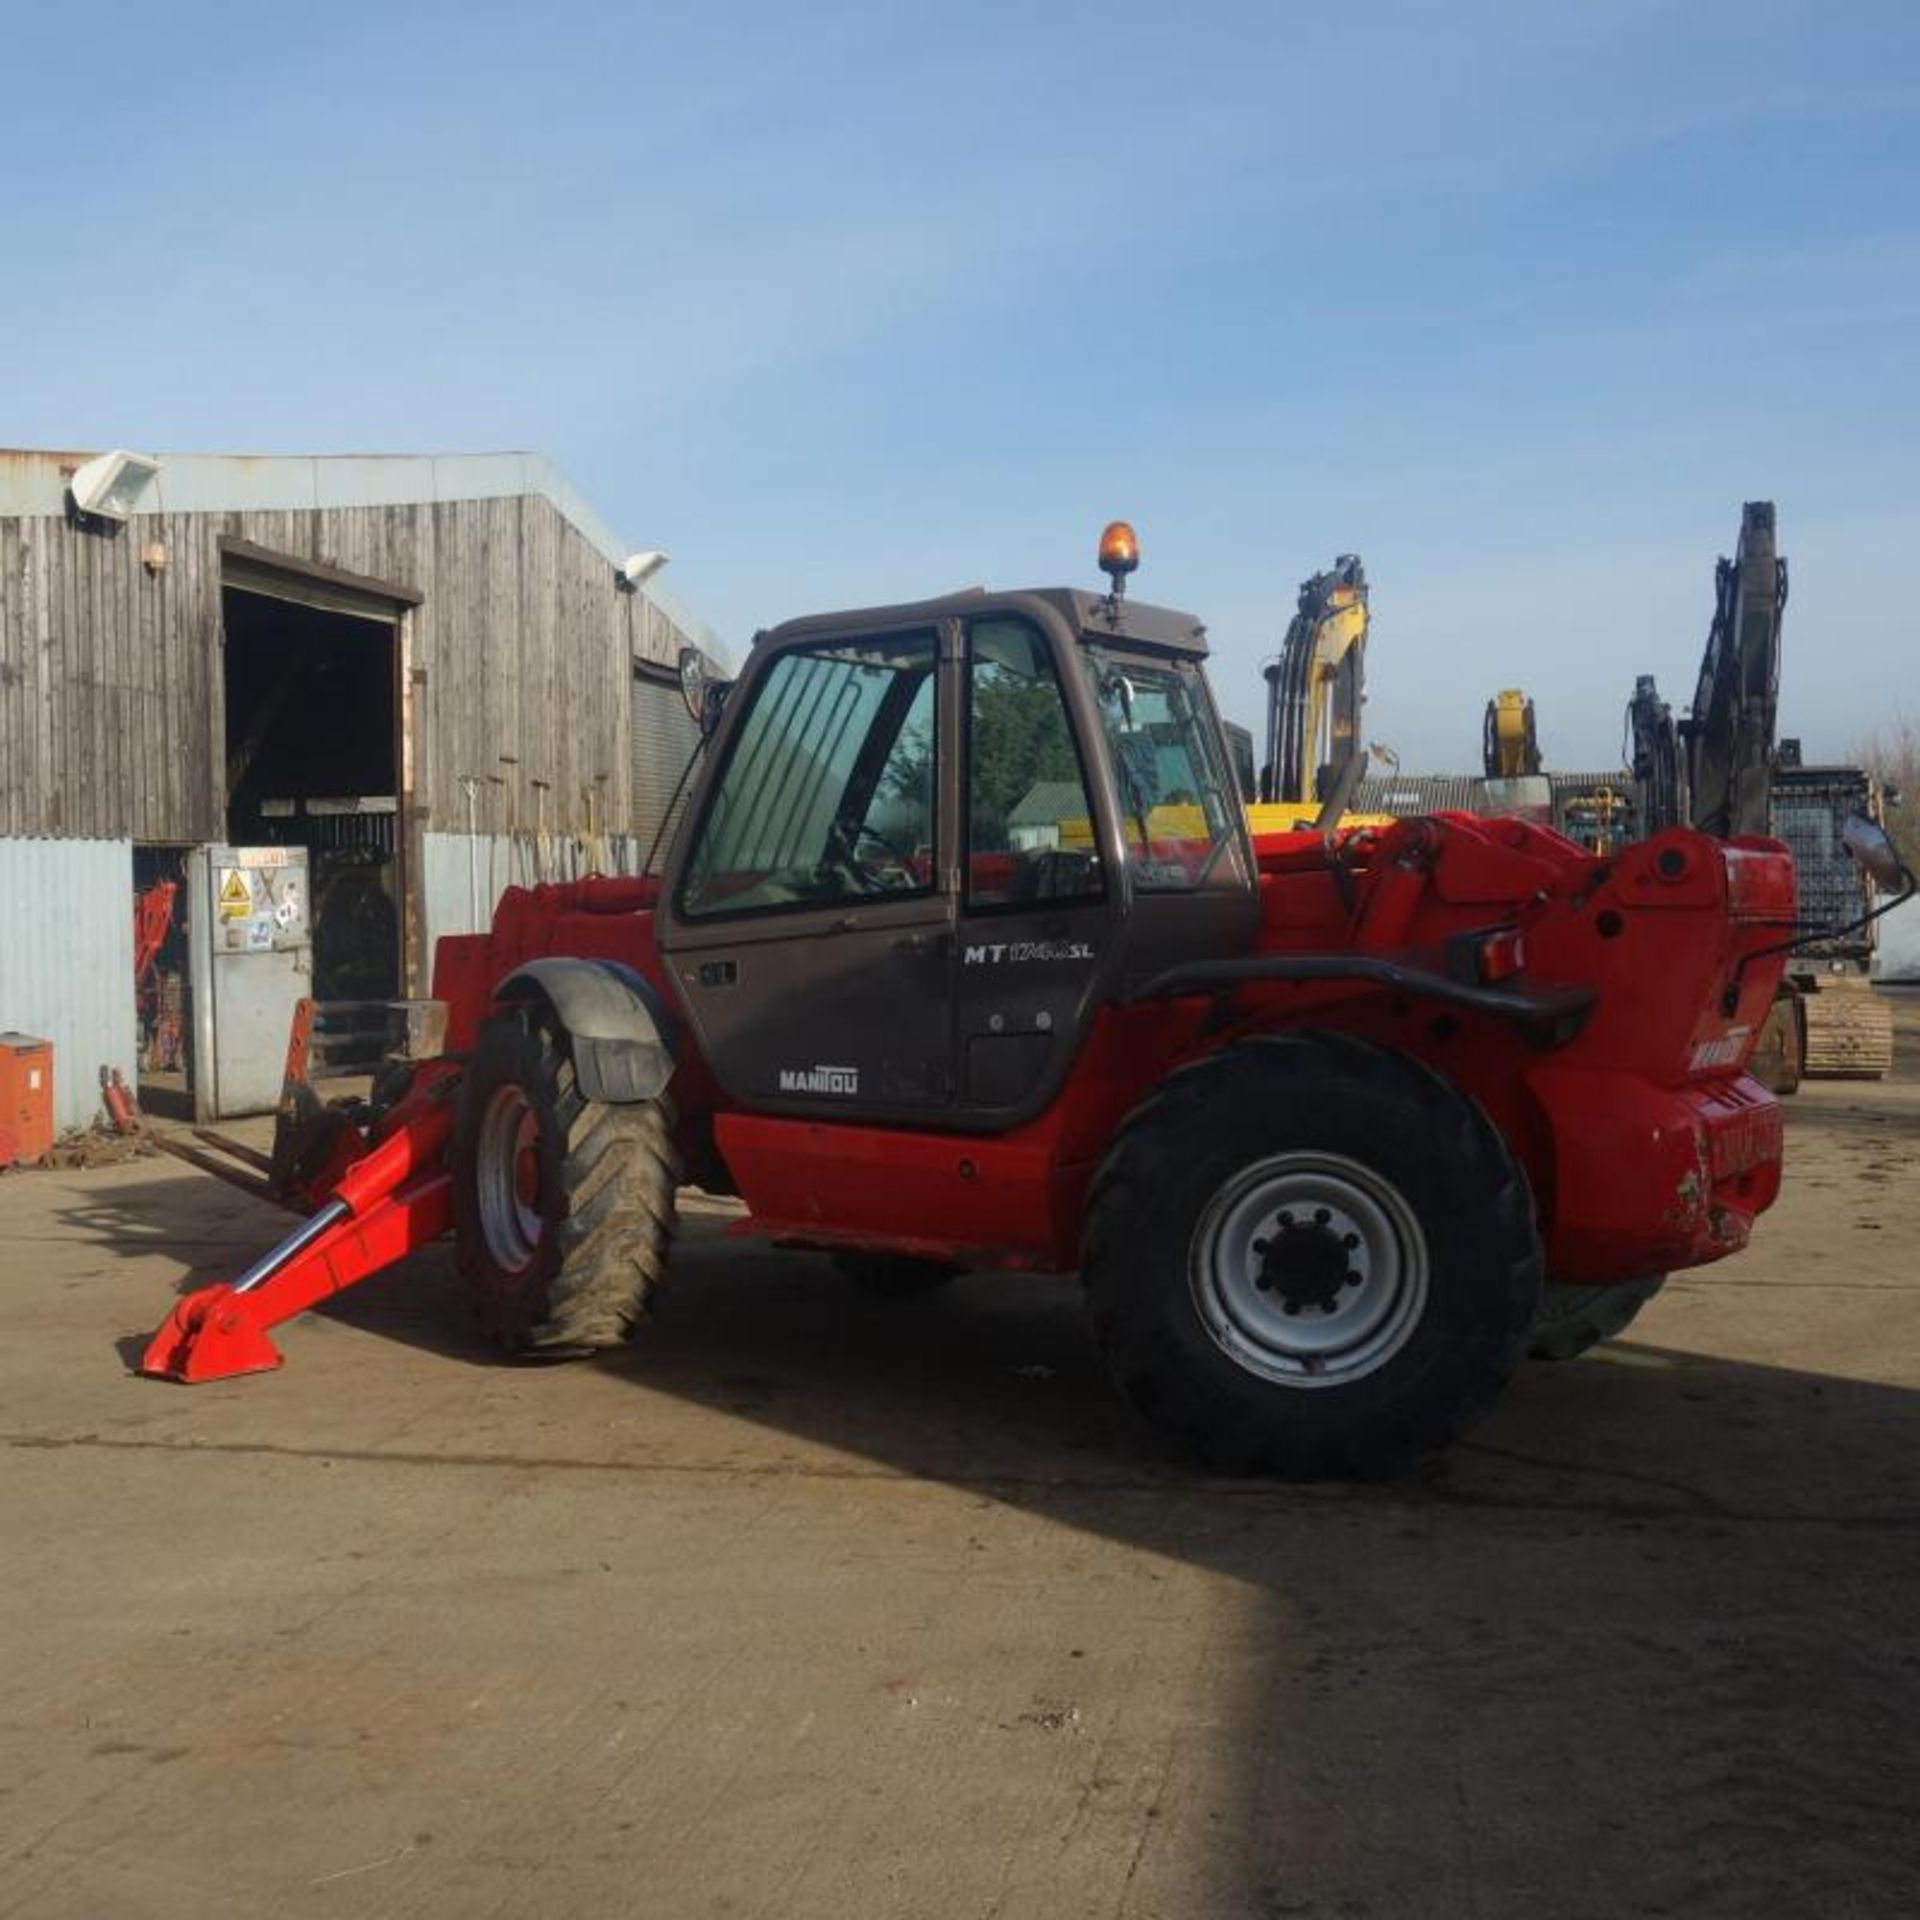 2004 Manitou MT1740SL Telehandler, 6844 Hours From New - Image 2 of 14